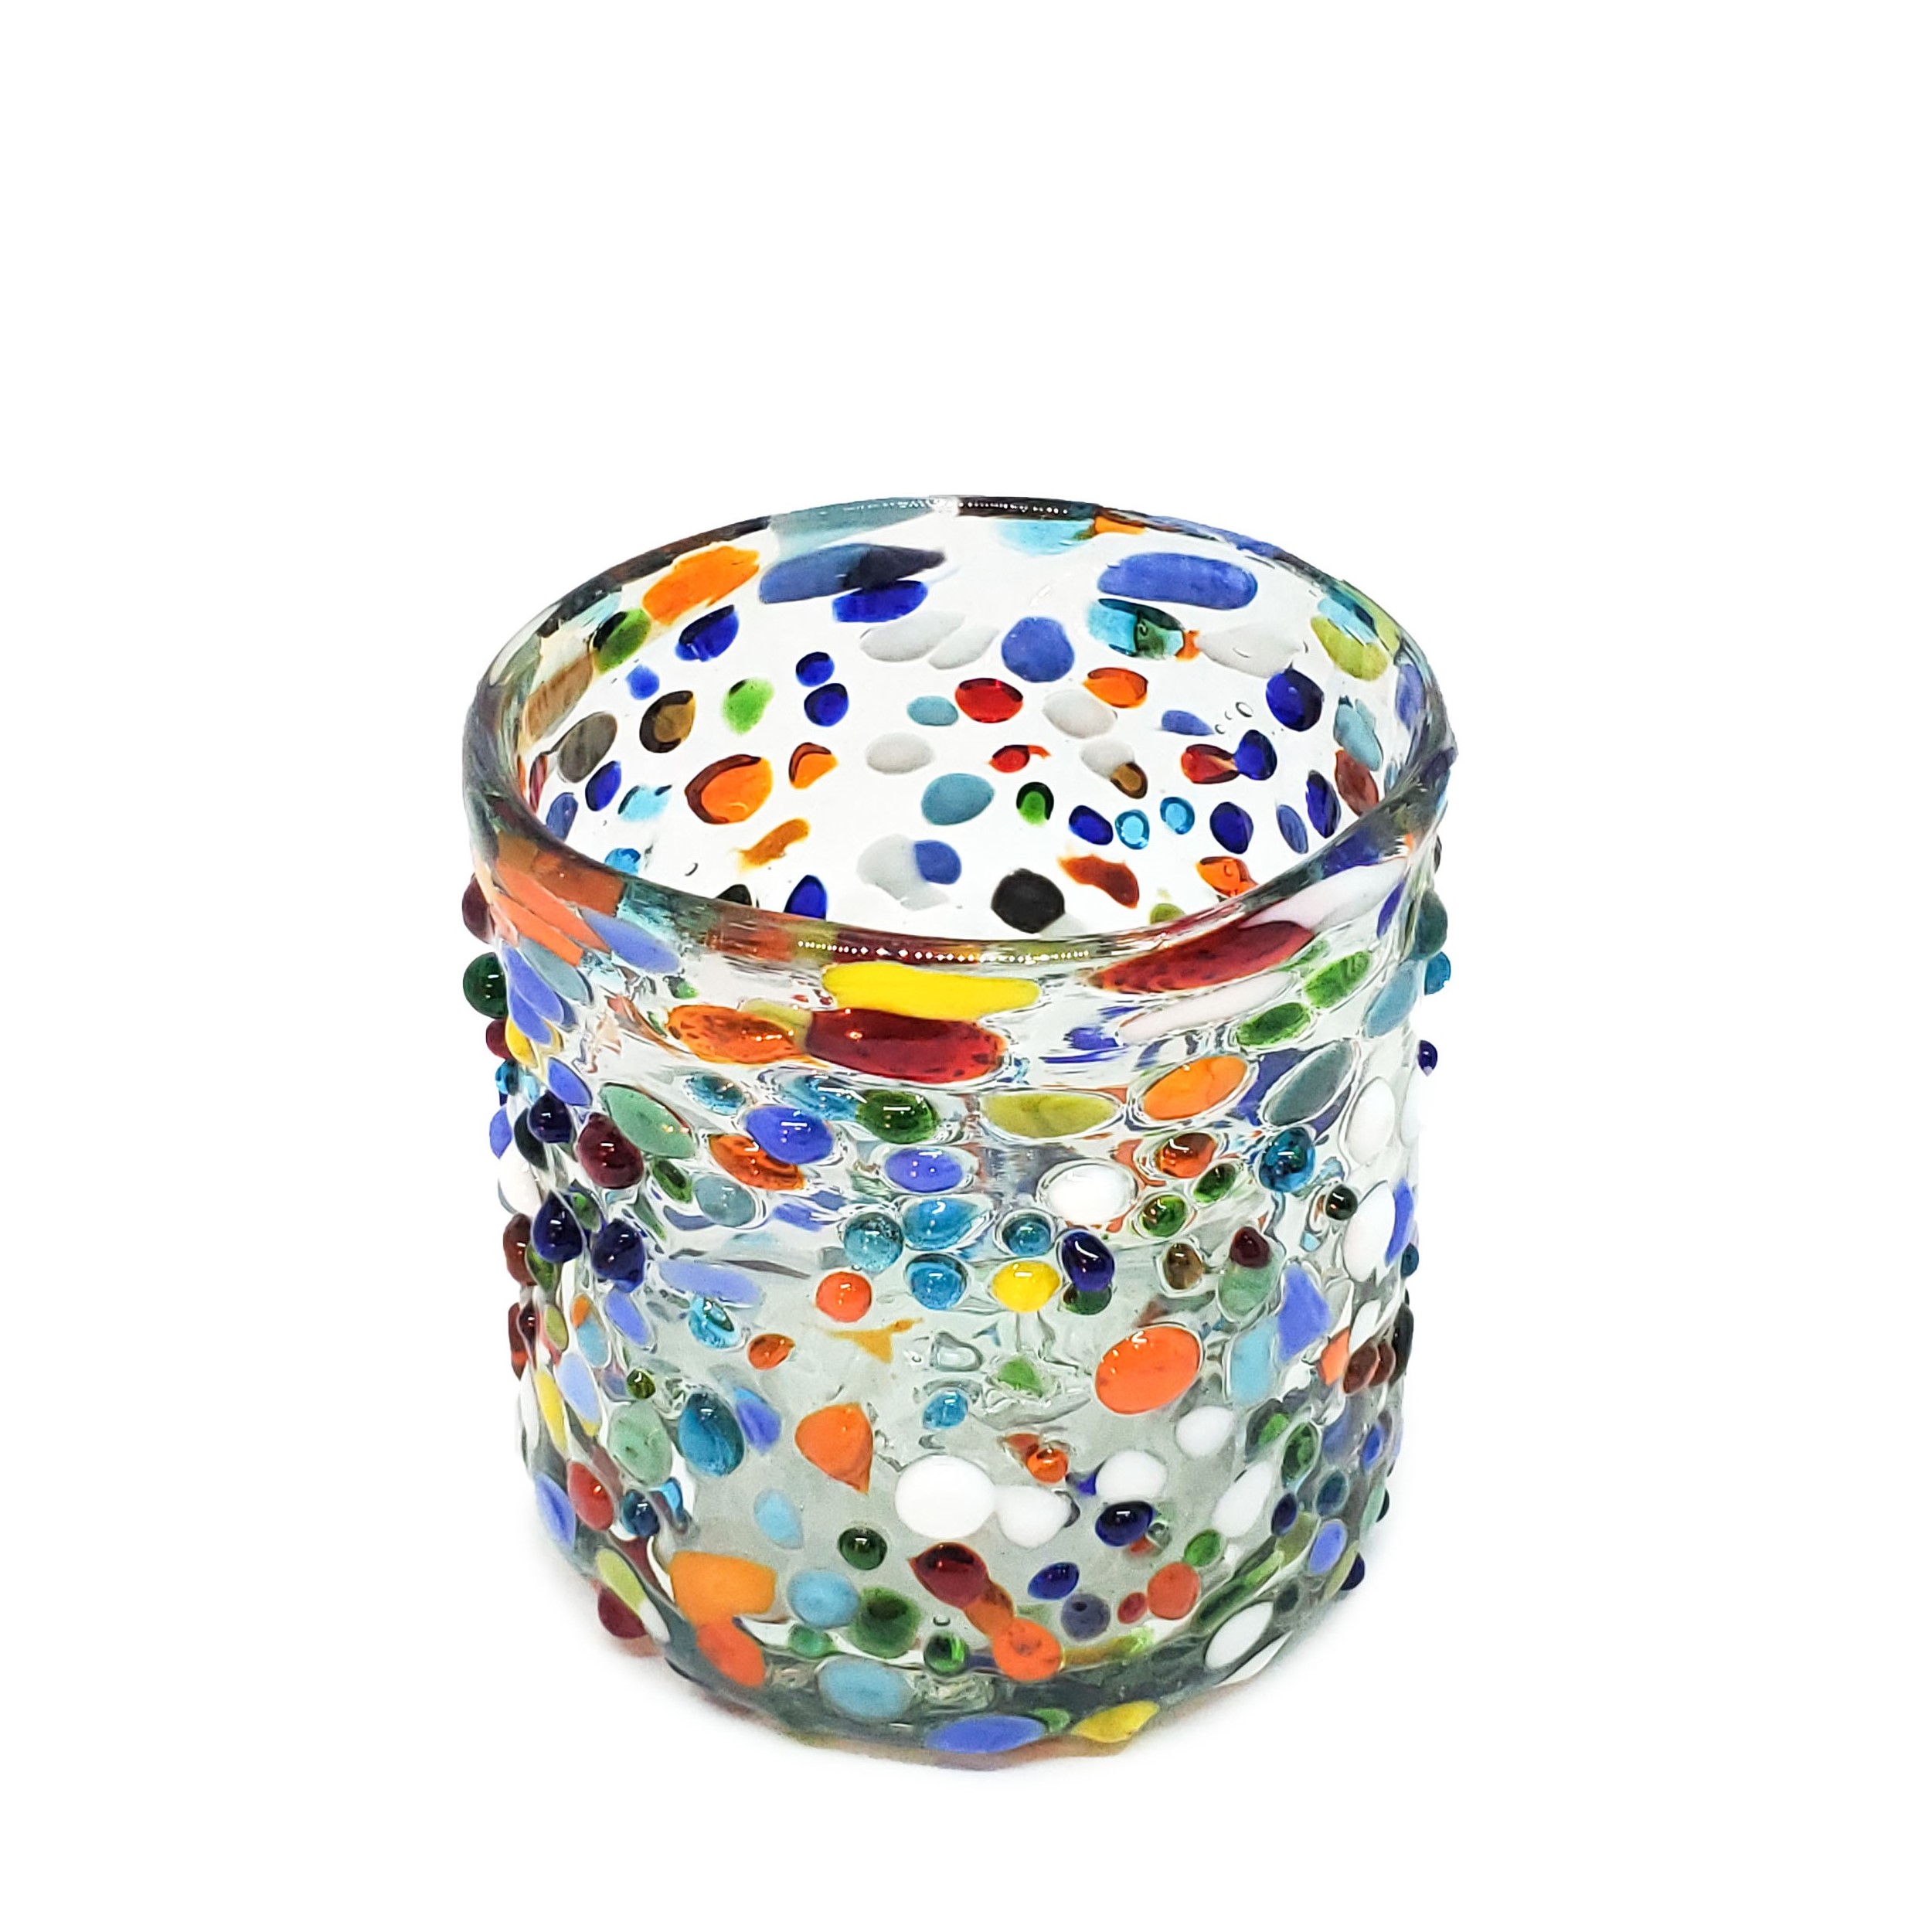 New Items / Confetti Rocks 8 oz DOF Rocks Glasses (set of 6) / Let the spring come into your home with this colorful set of glasses. The multicolor glass rocks decoration makes them a standout in any place.